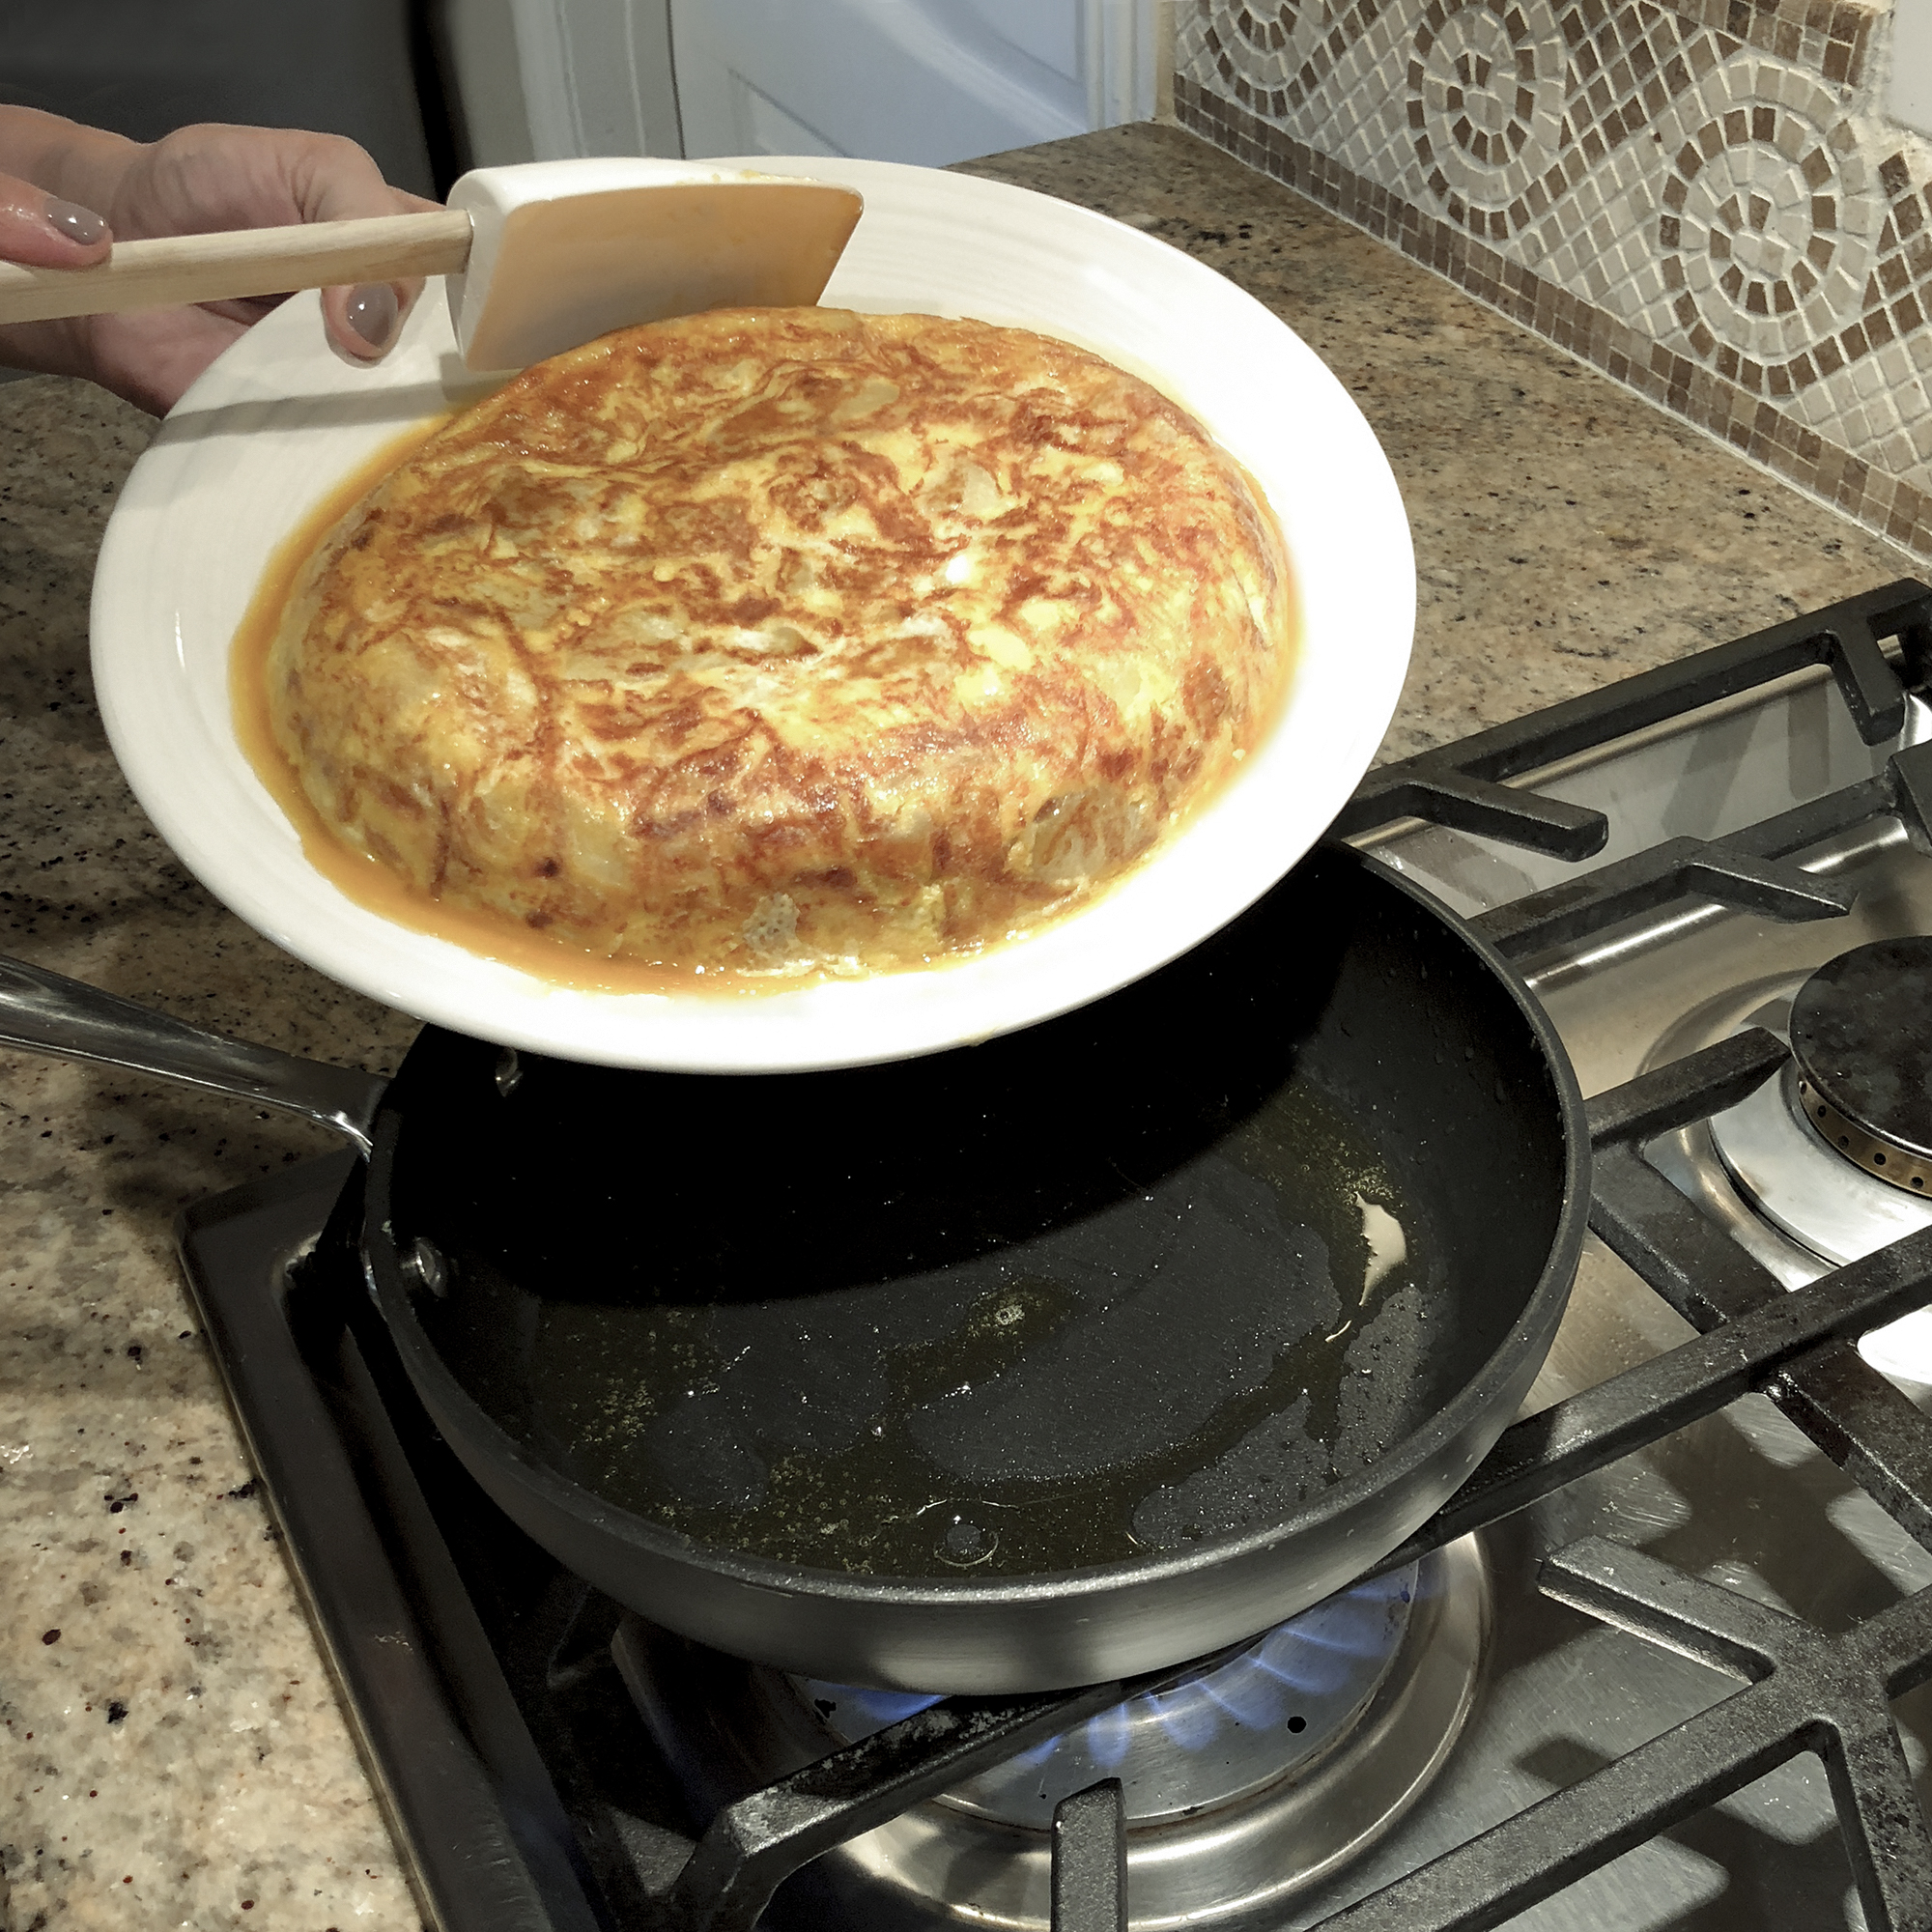 Tortilla Española (Spanish Omelet) that has been flipped onto a plate is being added back into pan to finish cooking